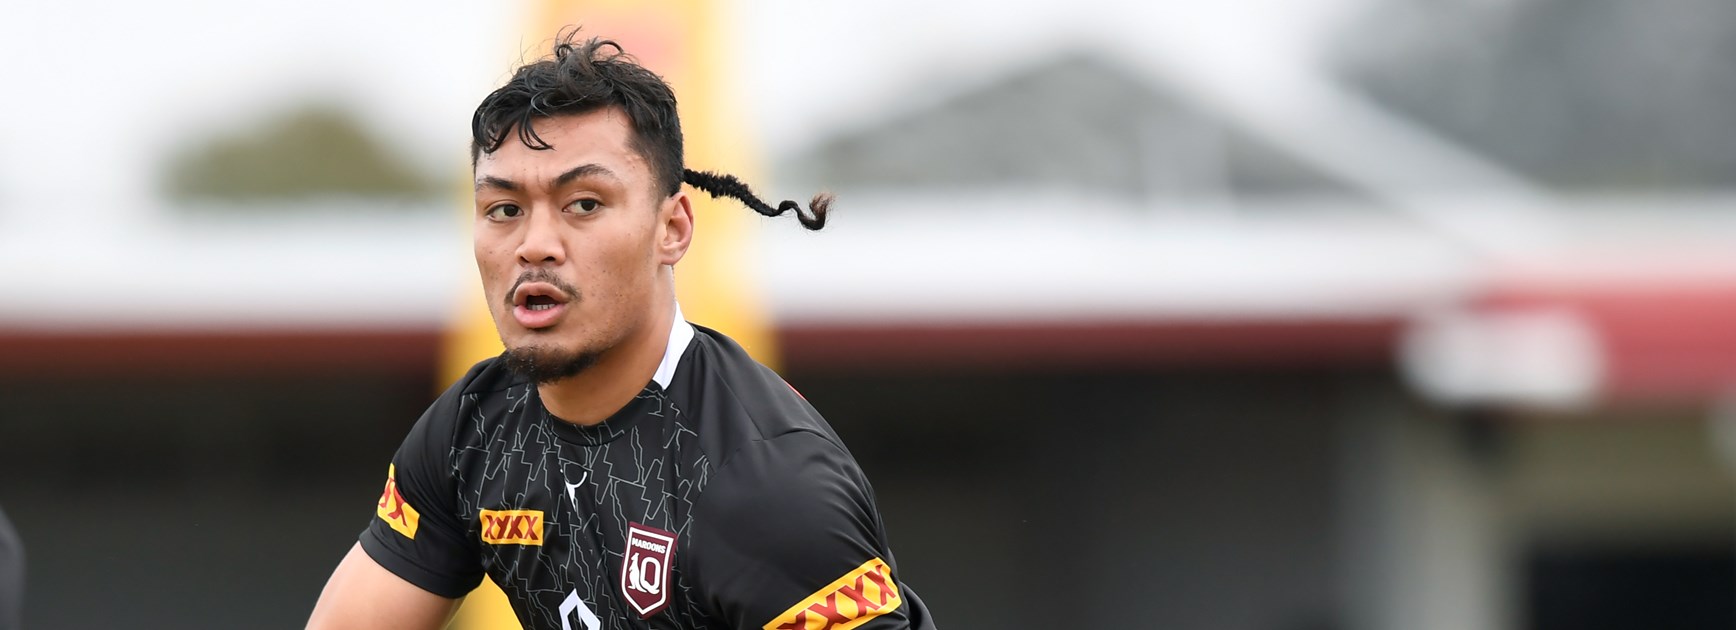 Maroons v Blues: Carrigan, Dearden set to start; Paulo moves to prop